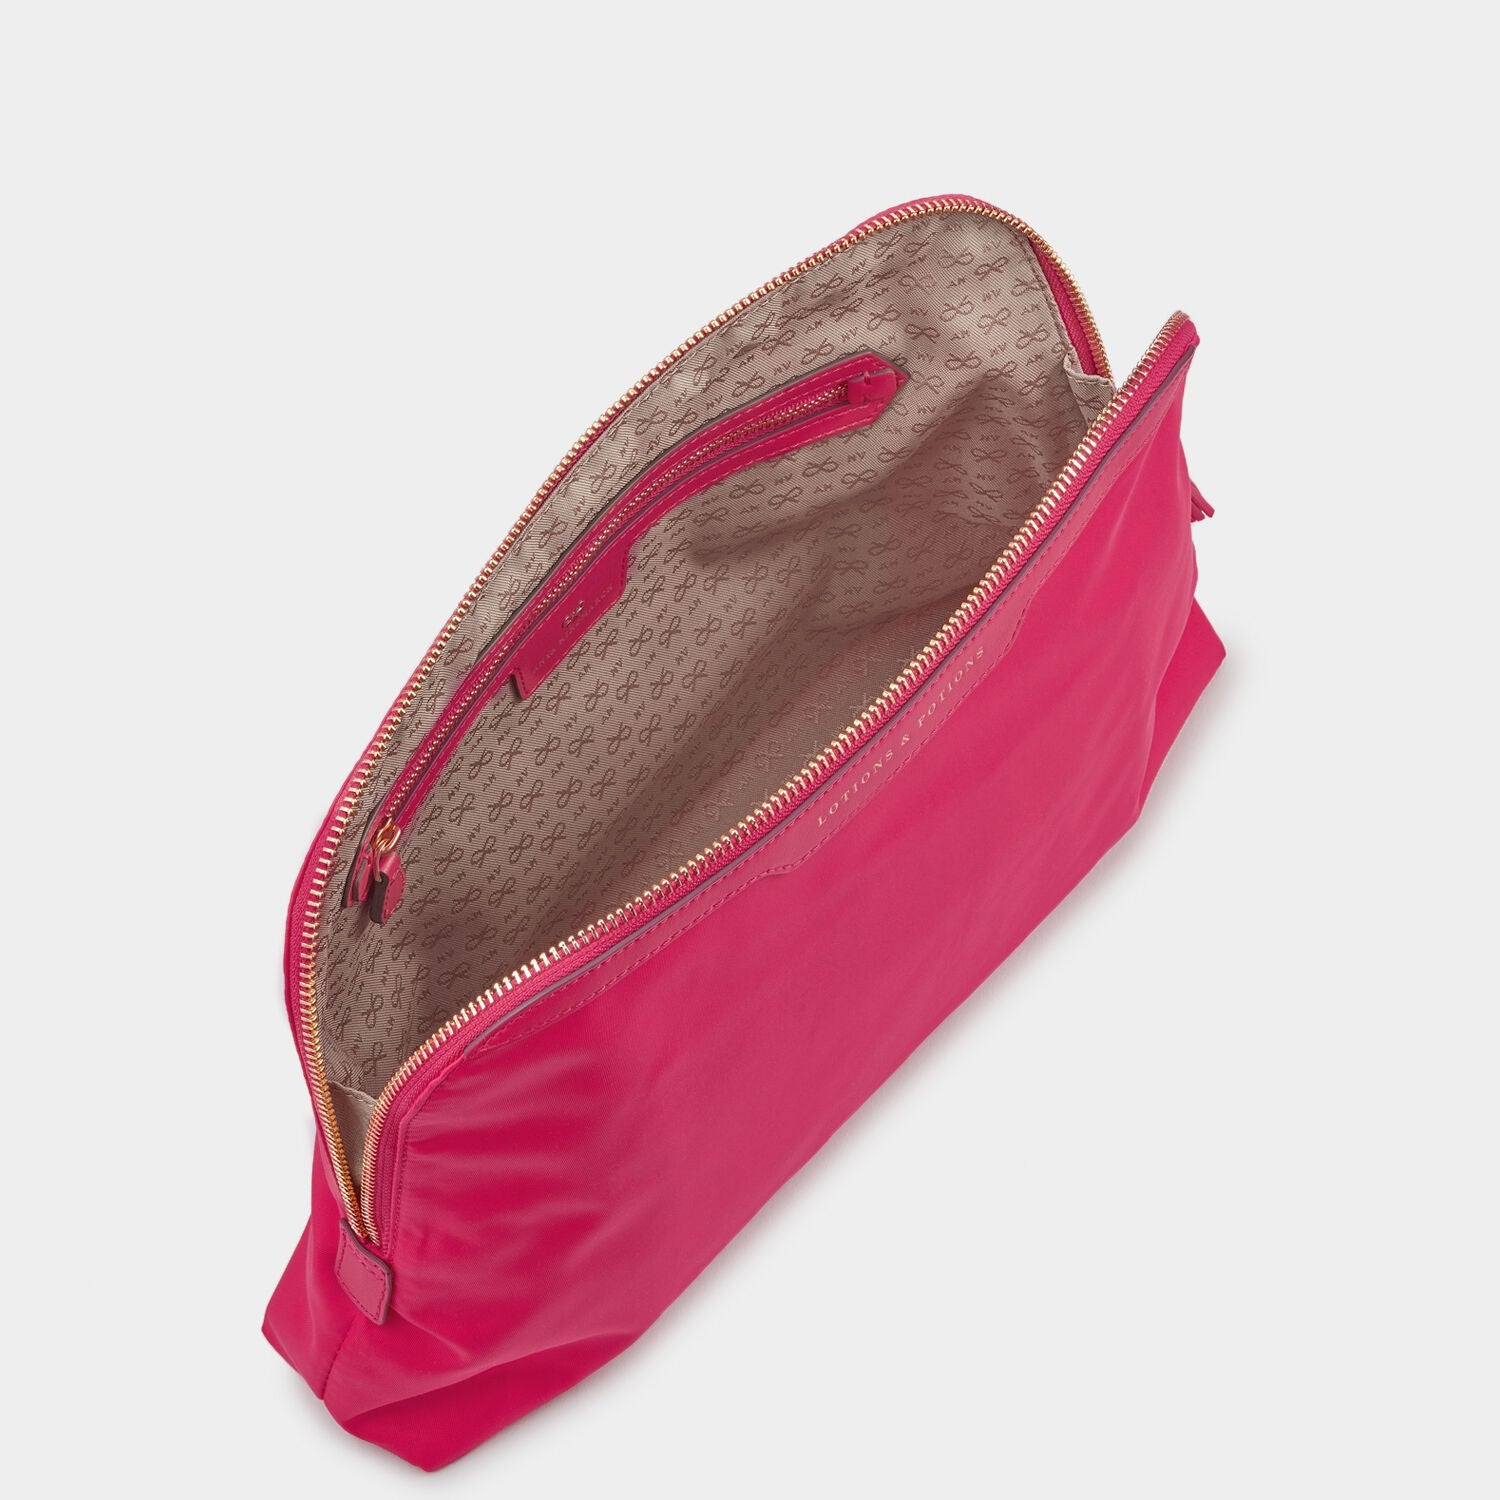 Lotions and Potions Pouch -

                  
                    ECONYL® in Hot Pink -
                  

                  Anya Hindmarch EU
